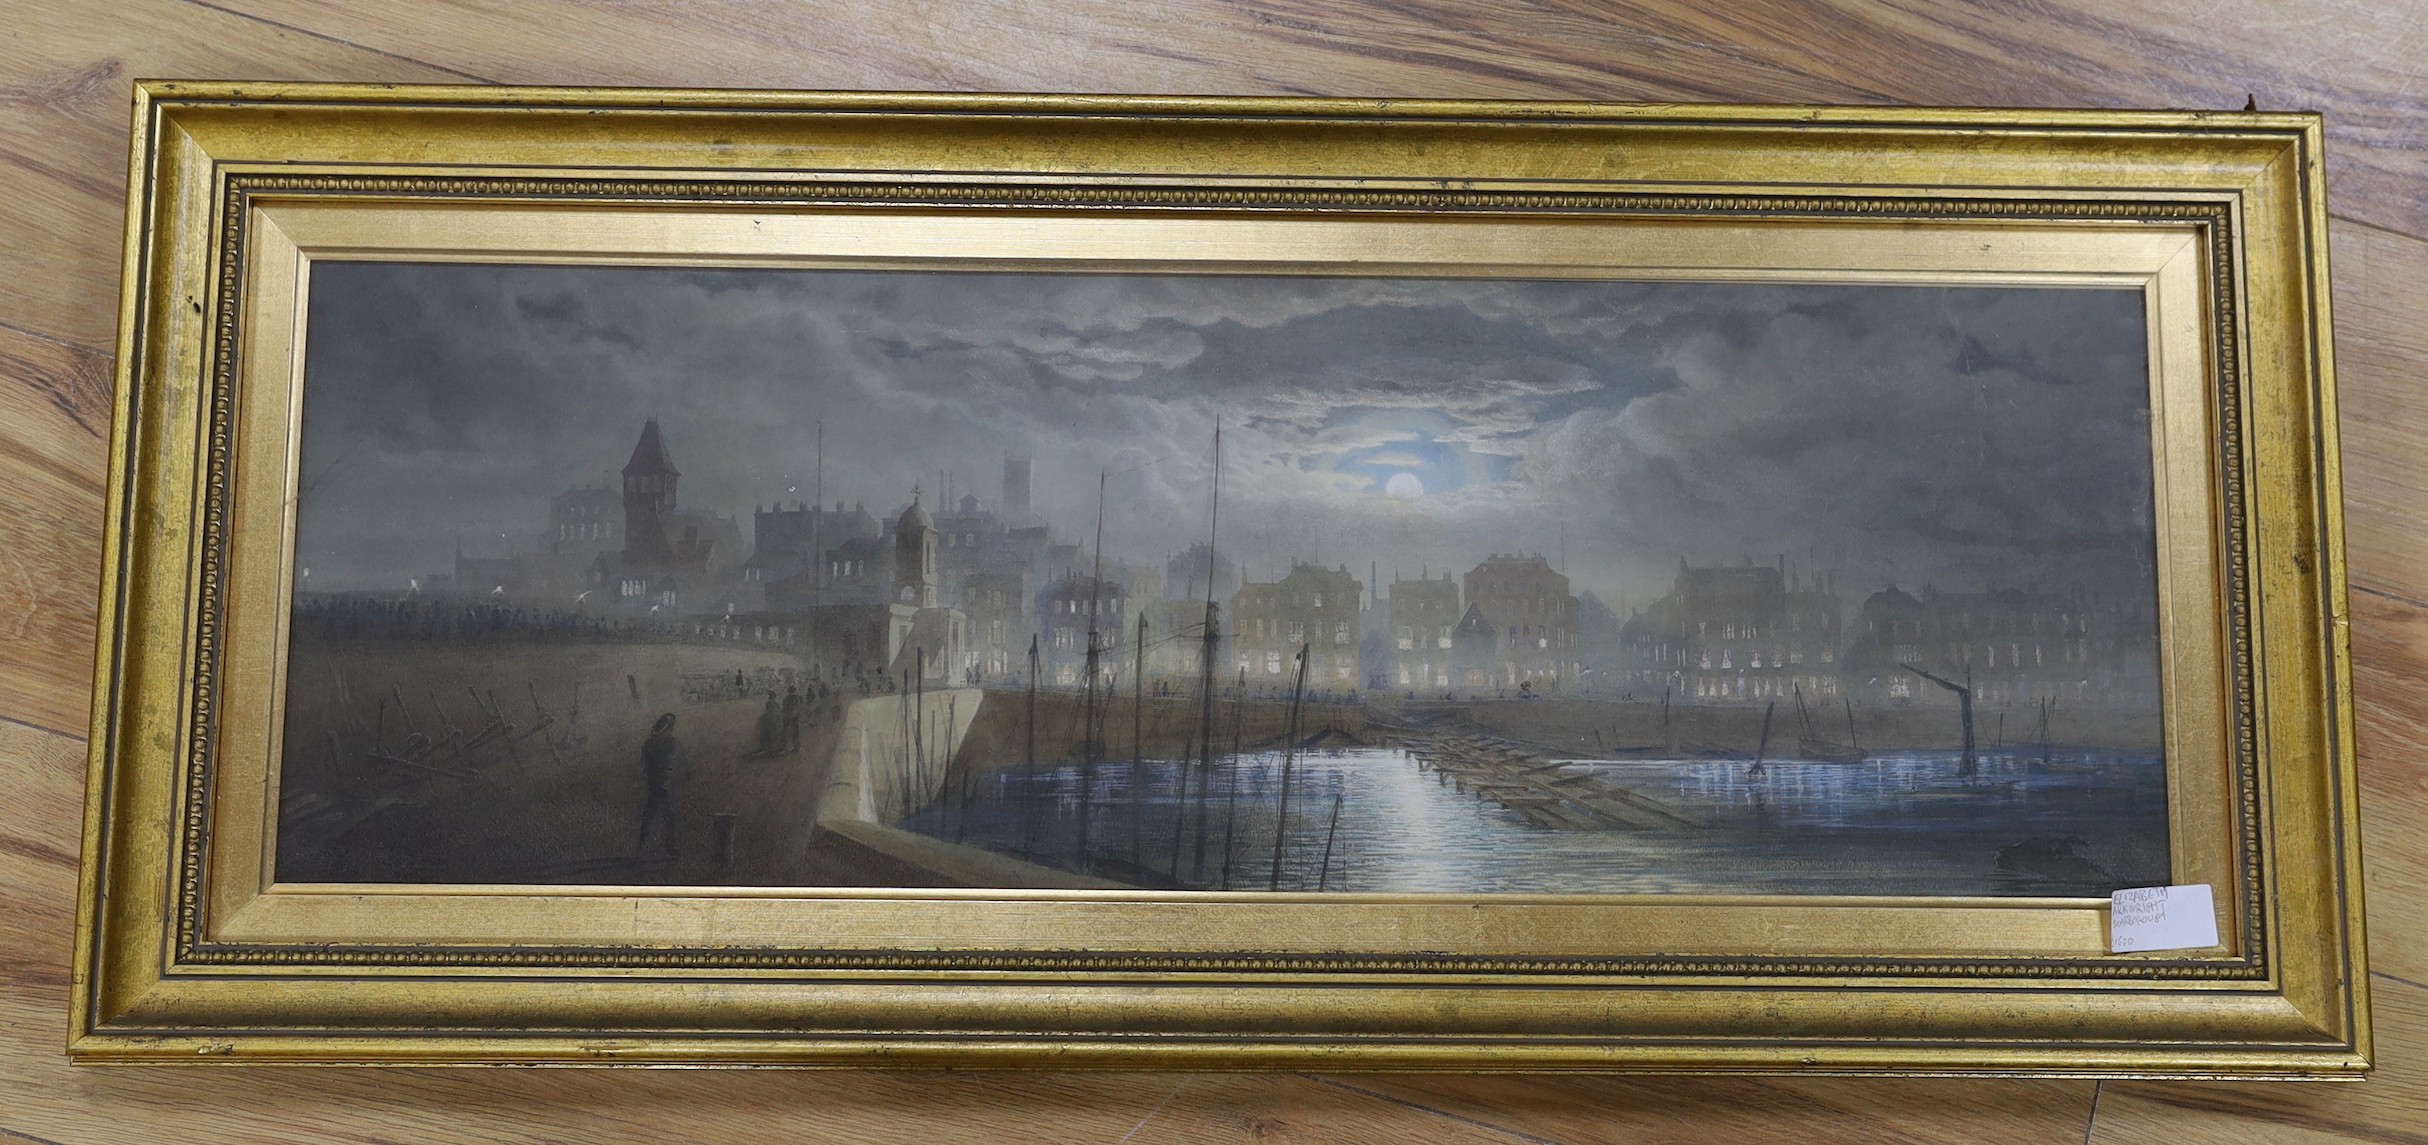 Elizabeth Arkwright, 19th century, gouache, Scarborough, A night time scene, provenance and gallery label verso, 26 x 79cm